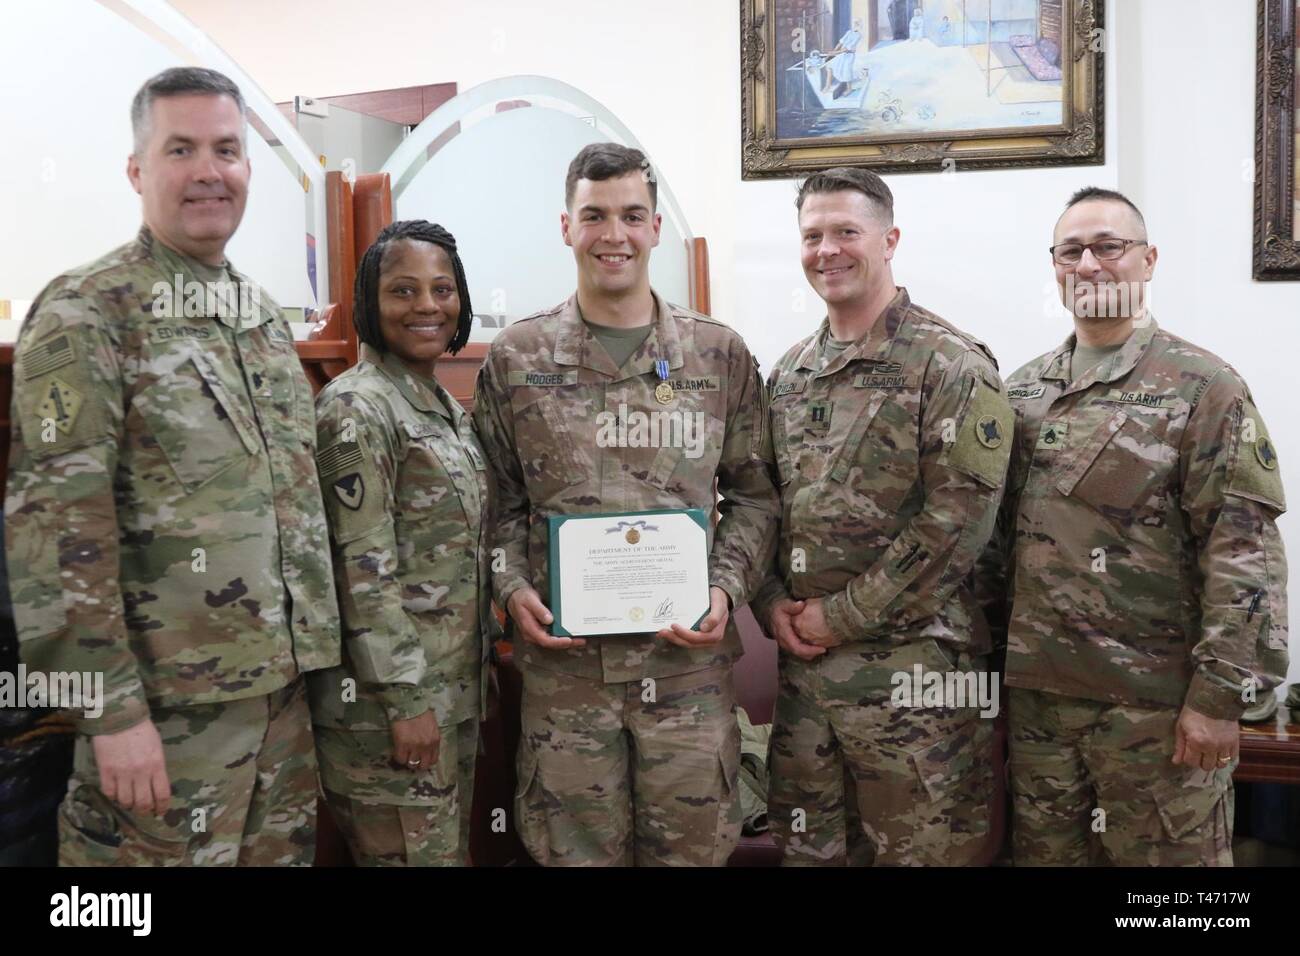 Lt. Col. Robert Edwards, Sgt. First Class Wanda Cook, Cpt. Eric Nowlen, Staff Sgt. Dean Rodriquez ,184th Sustainment Command, stand with one of their own, Sgt. Christopher Hodges, after he was selected as noncommissioned officer division runner up in the 1st Theater Sustainment Command's Best Warrior Competition during an awards ceremony at Camp Arifjan, Kuwait, March 14, 2019. Stock Photo